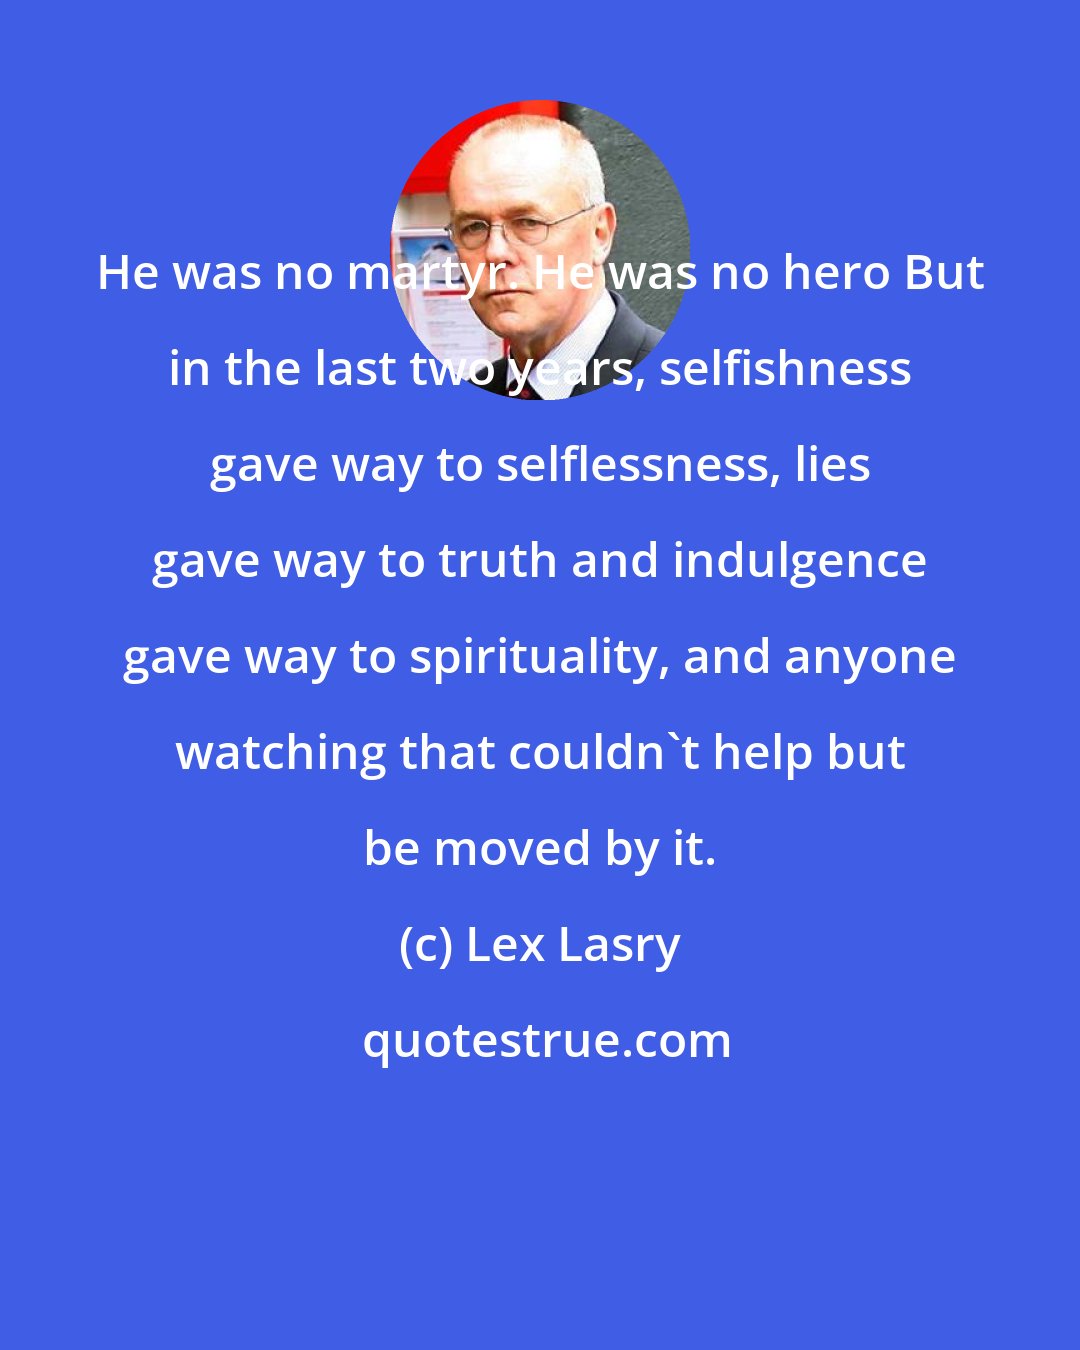 Lex Lasry: He was no martyr. He was no hero But in the last two years, selfishness gave way to selflessness, lies gave way to truth and indulgence gave way to spirituality, and anyone watching that couldn't help but be moved by it.